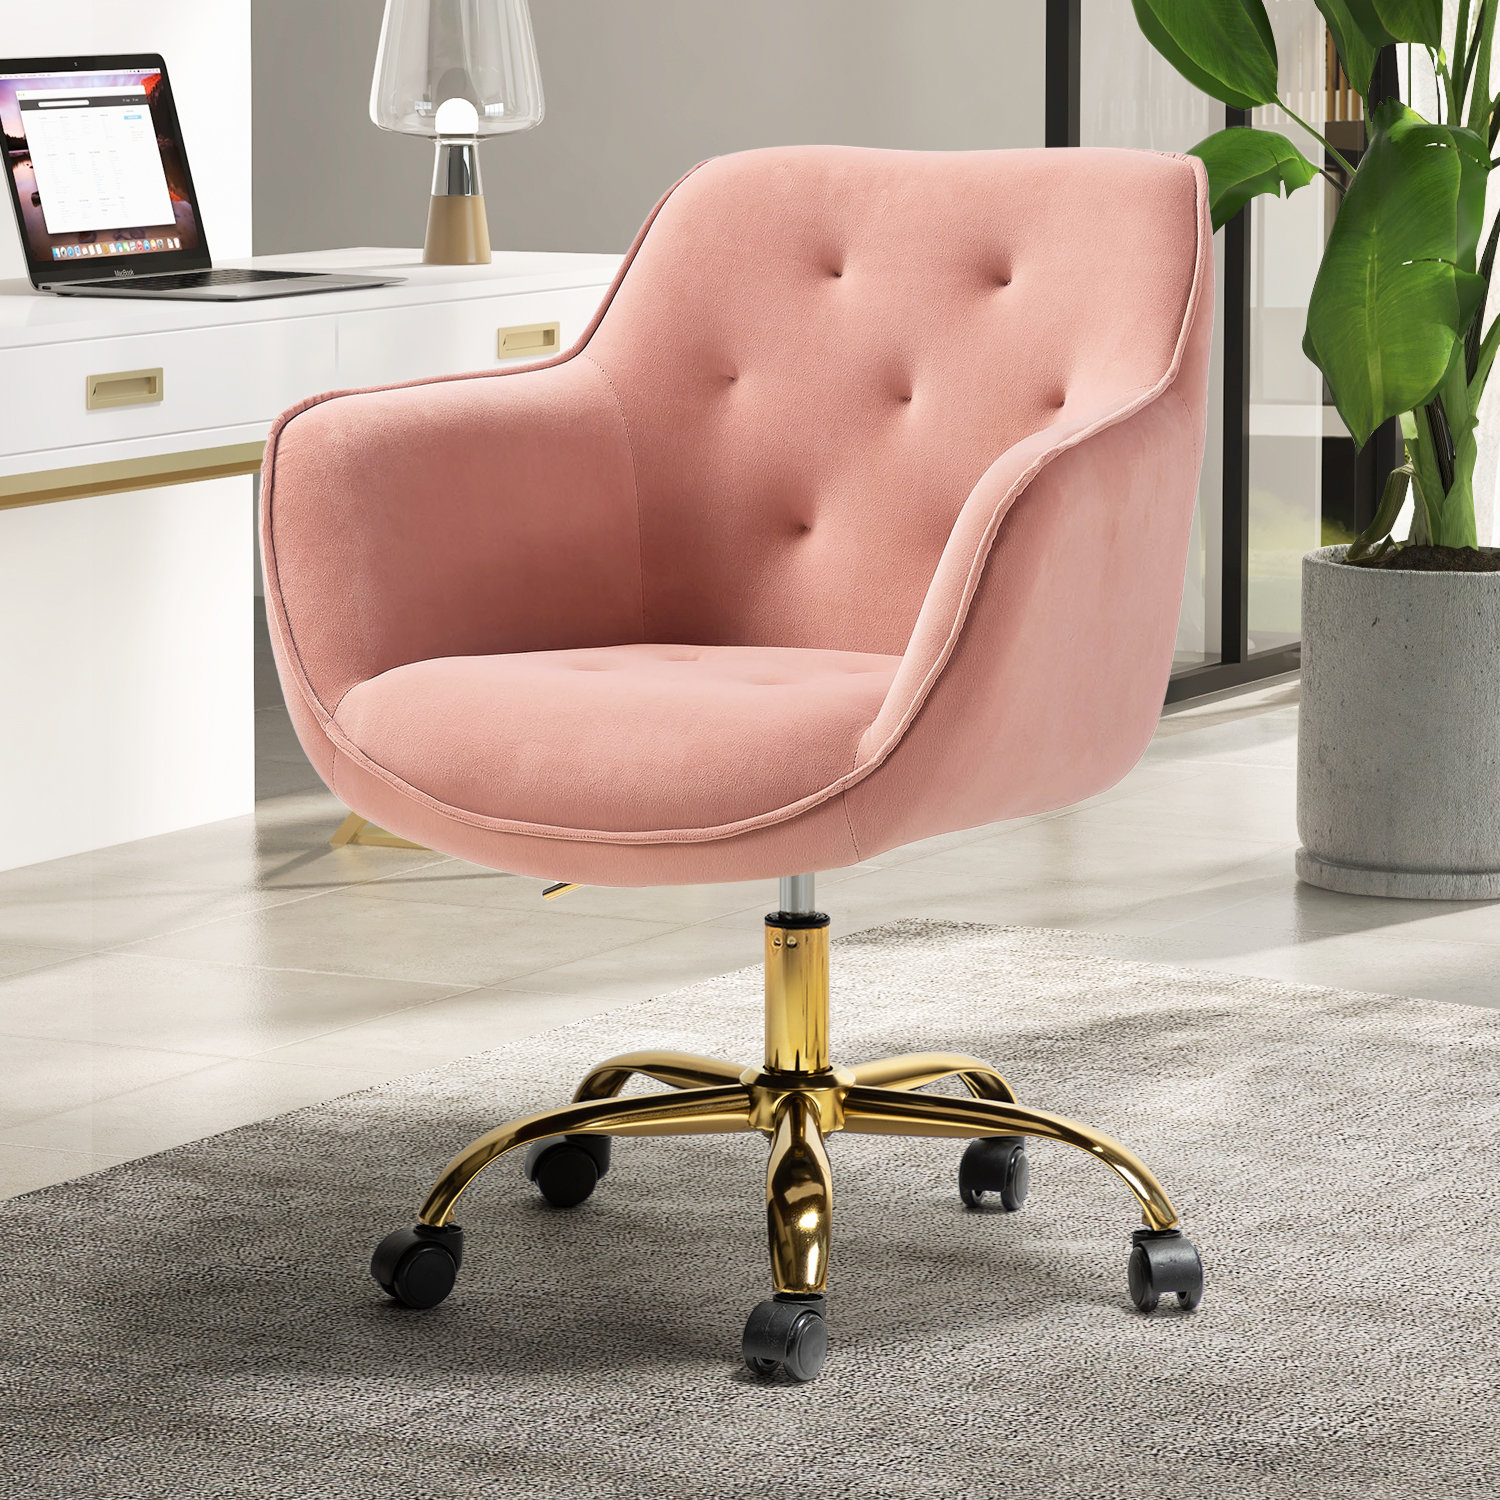 Clio Task Chair with Height Adjustable Etta Avenue Upholstery Color: Pink